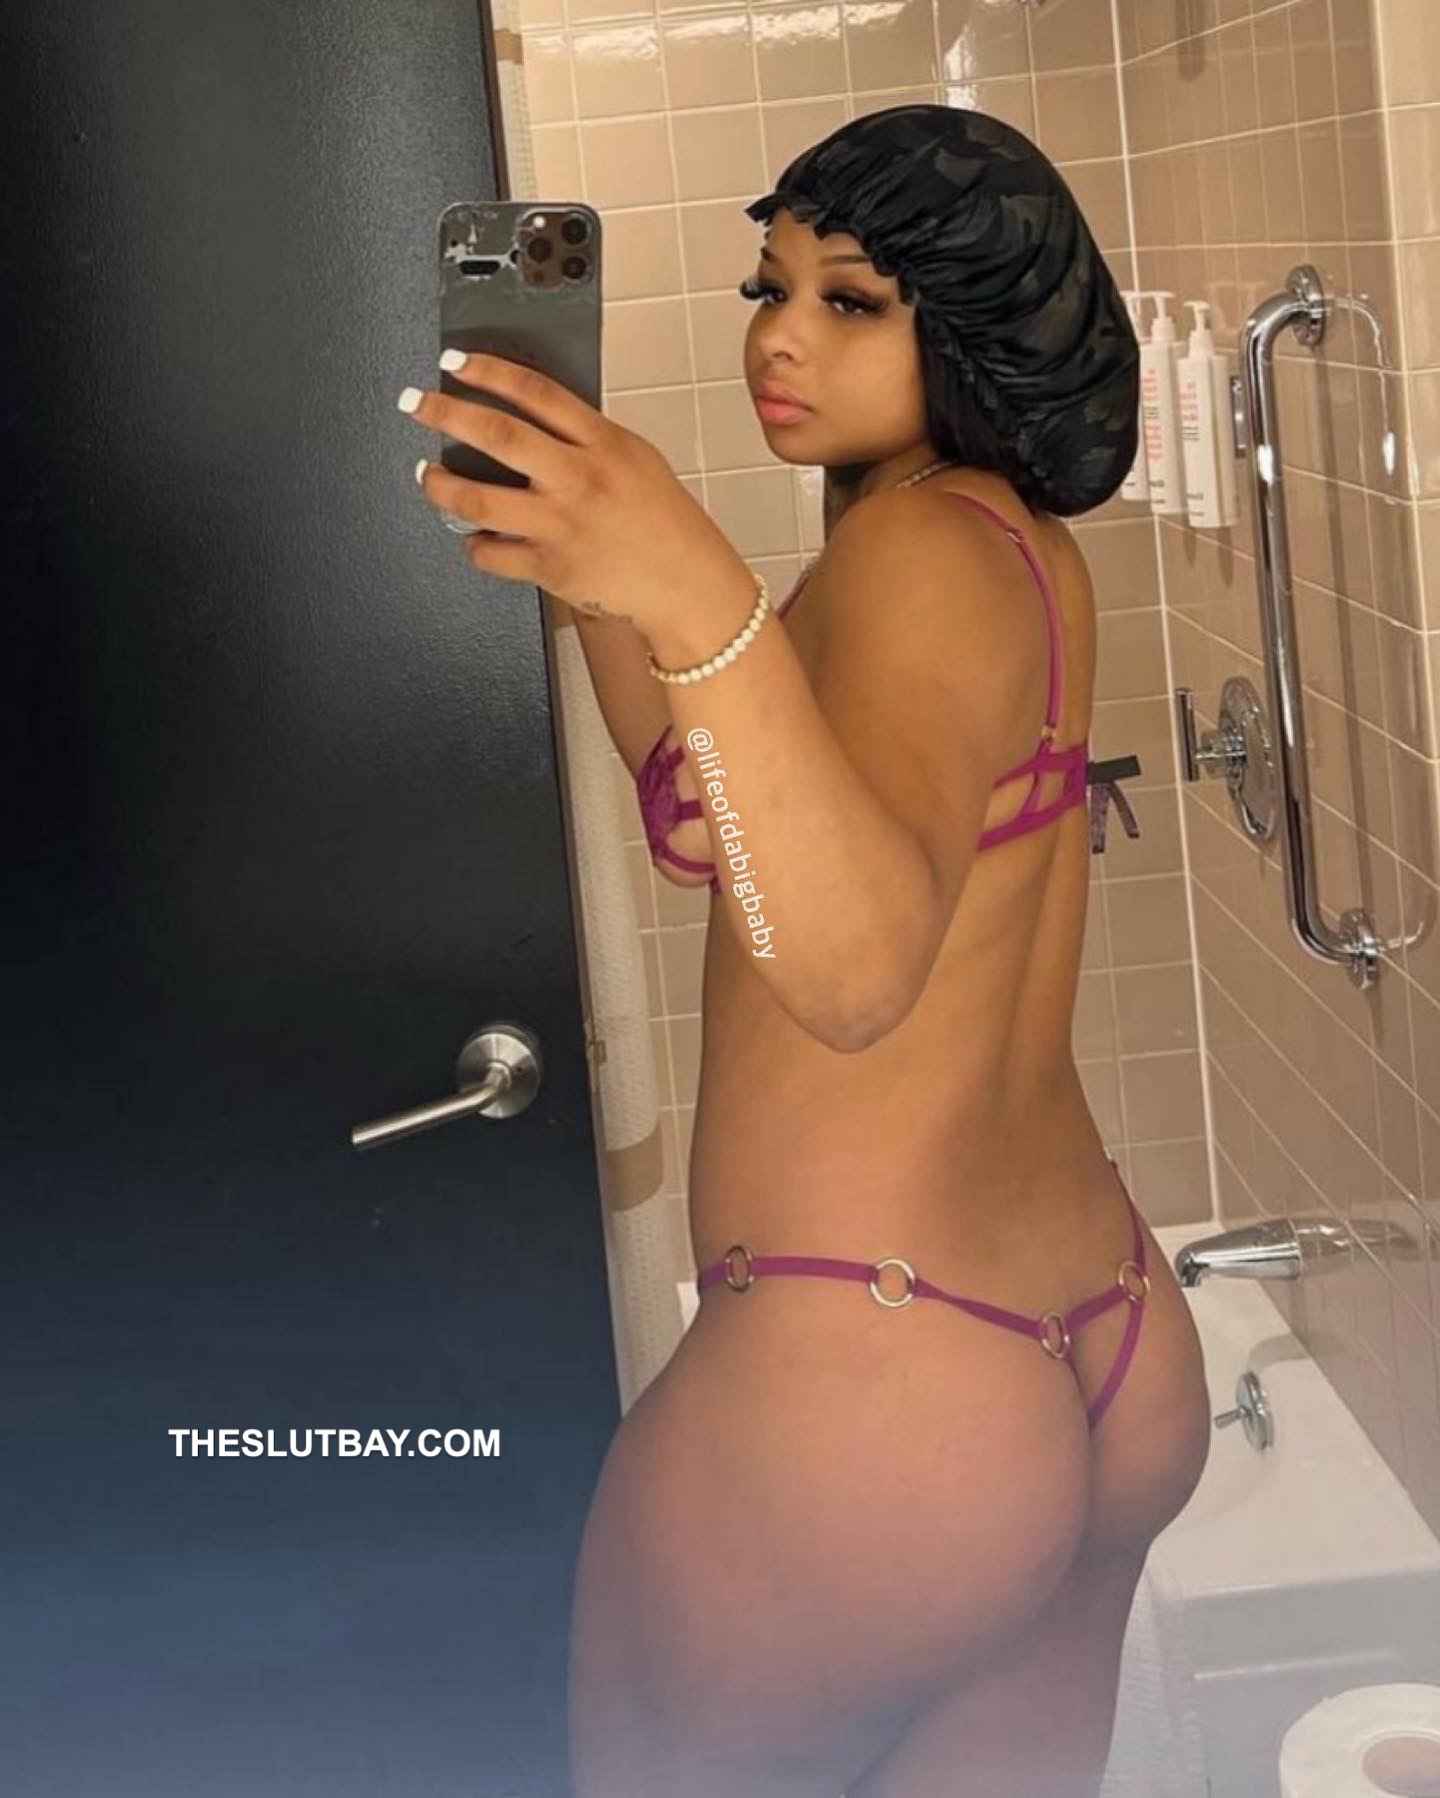 FULL VIDEO: Chrisean Rock Nude & Sex Tape With Blueface Leaked!